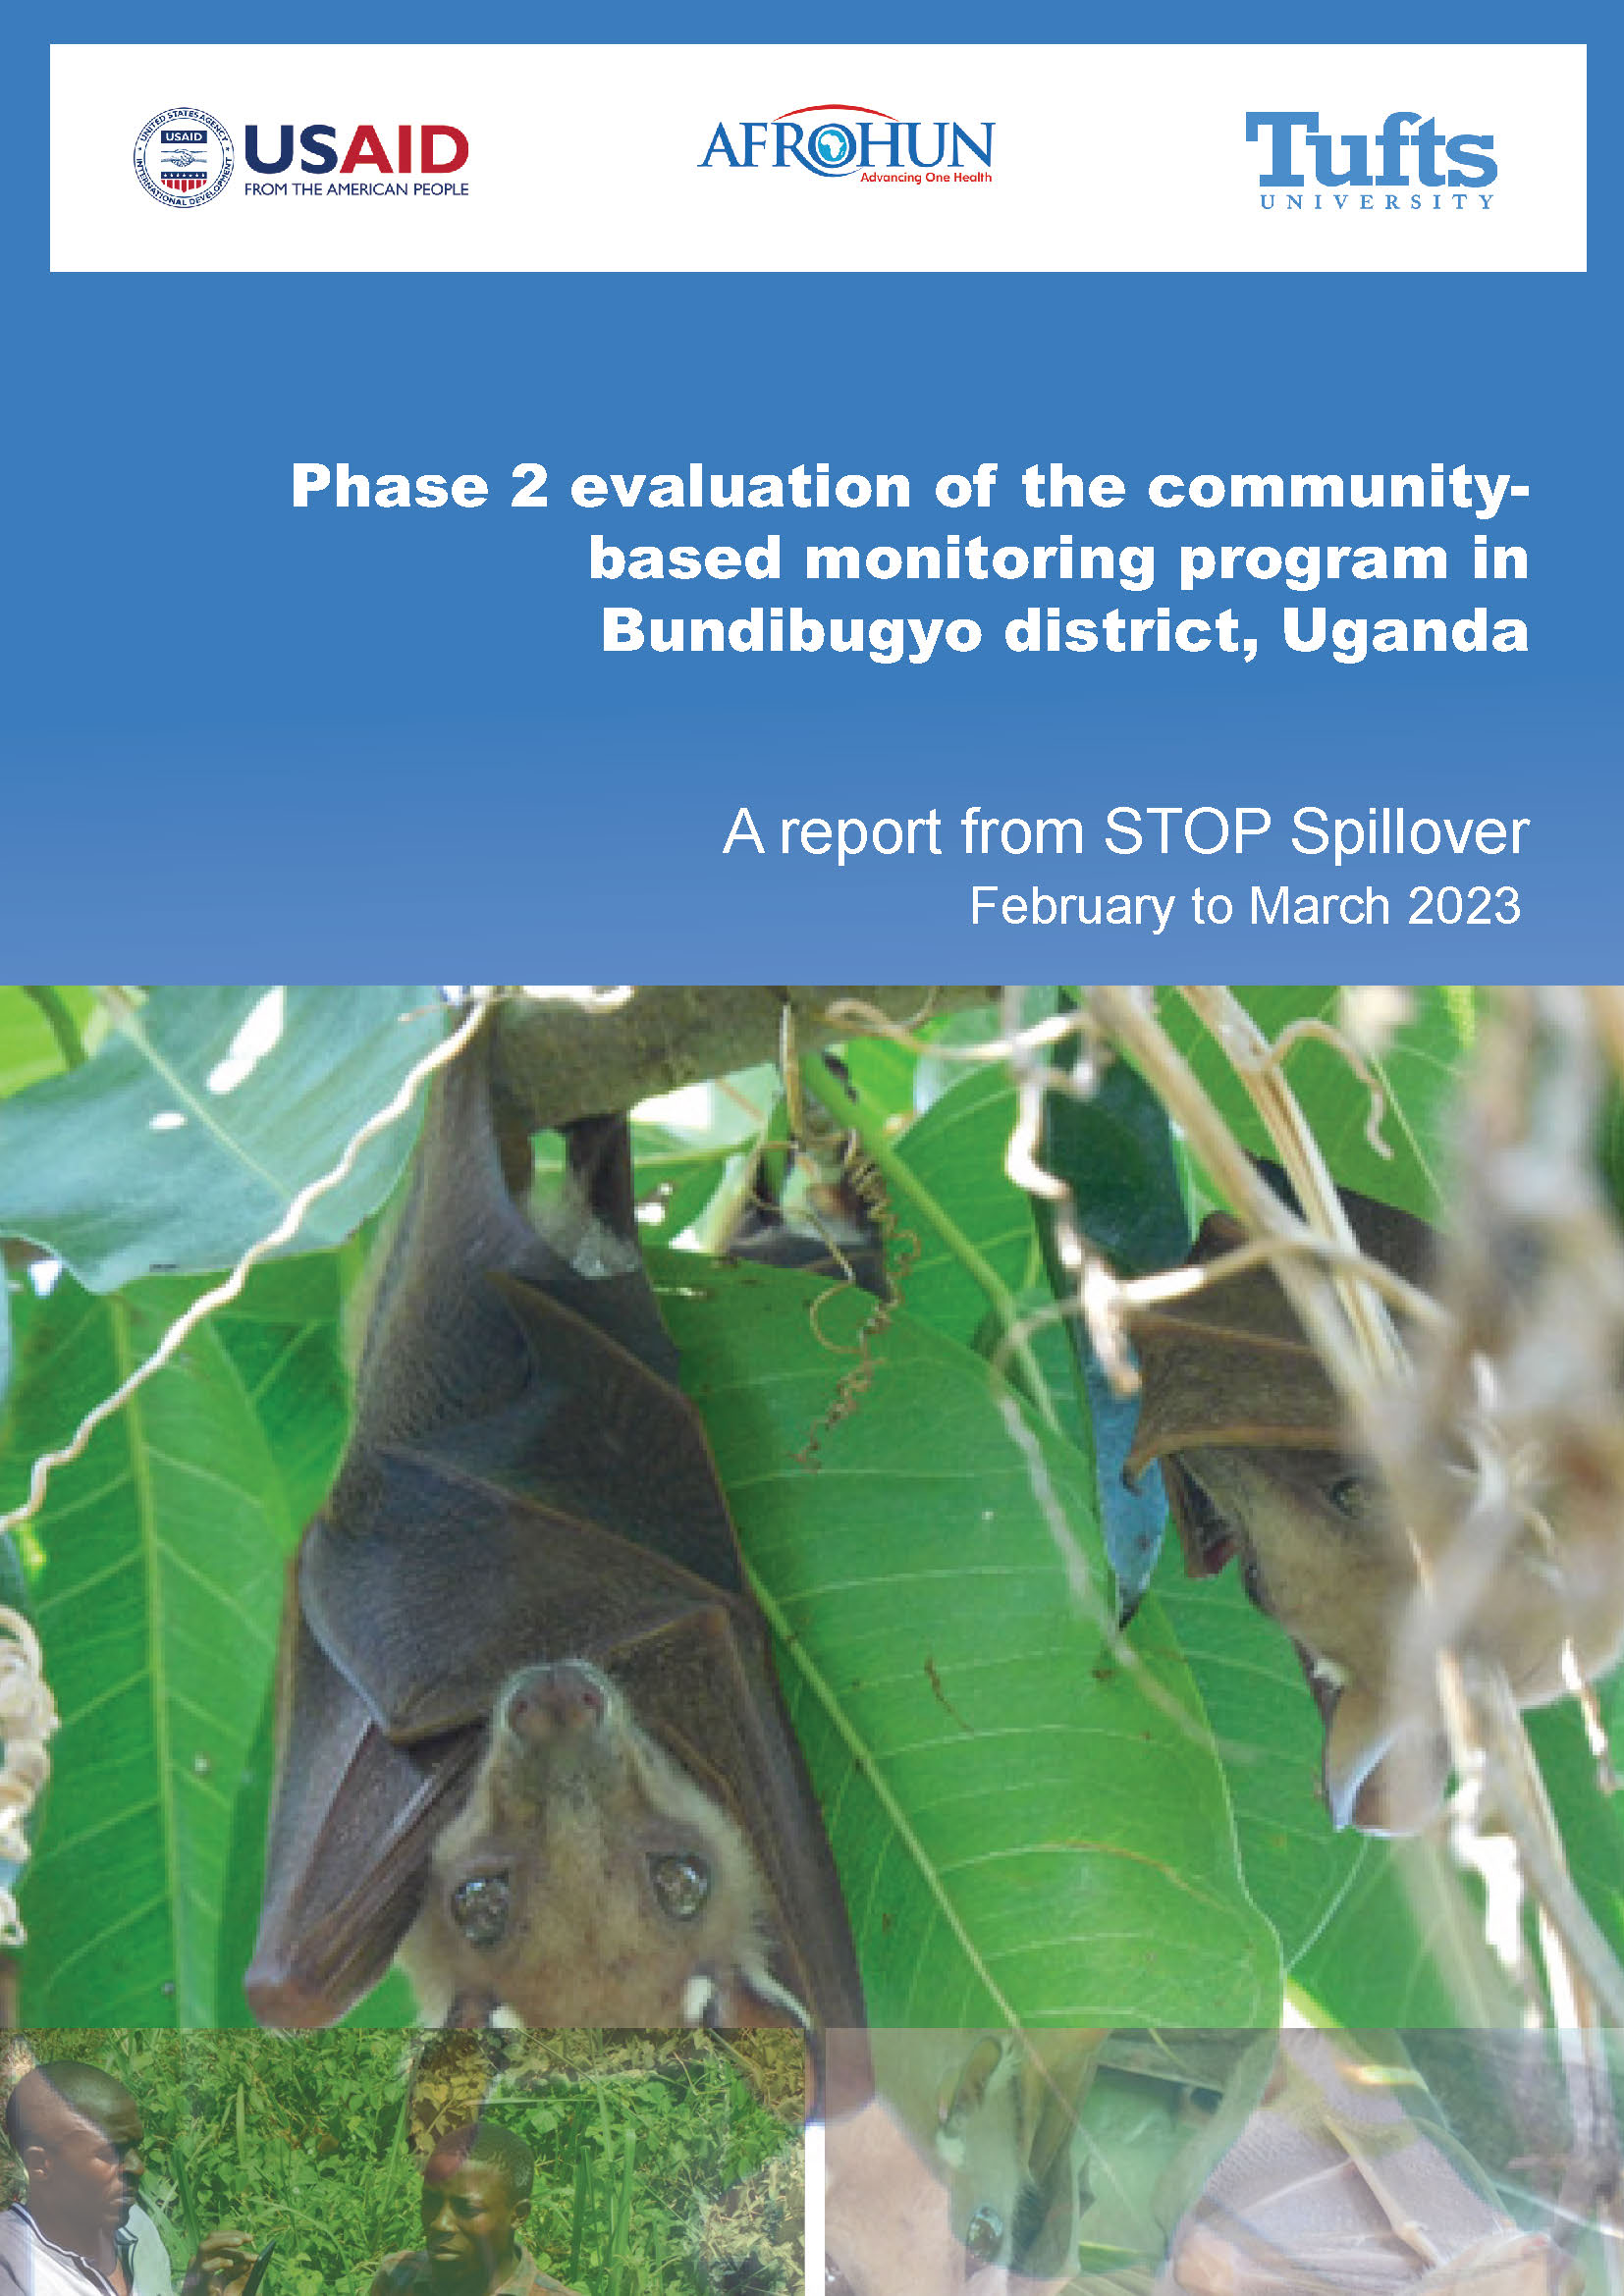 Thumbnail of report cover, with a photo of a bat hanging from a tree.